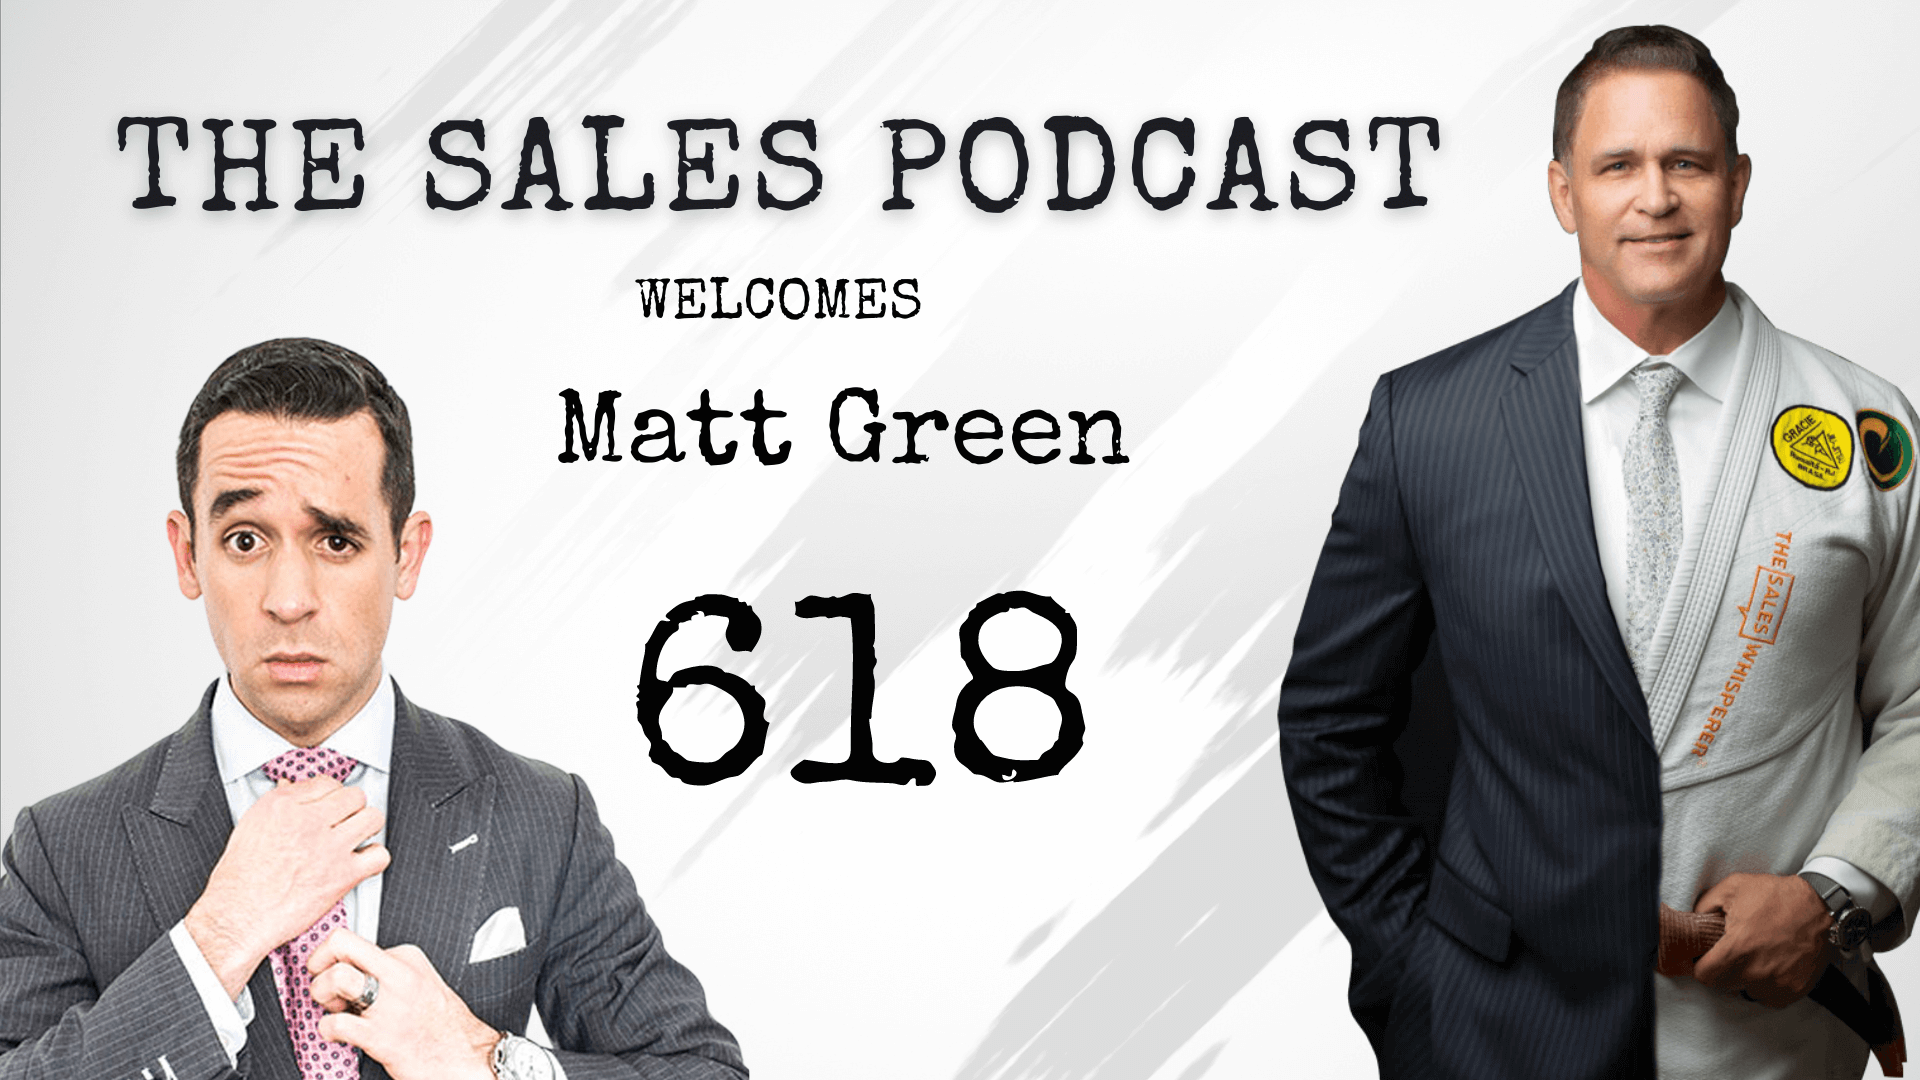 Matt Green of Sales Assembly on The Sales Podcast with Wes Schaeffer, The Sales Whisperer® 